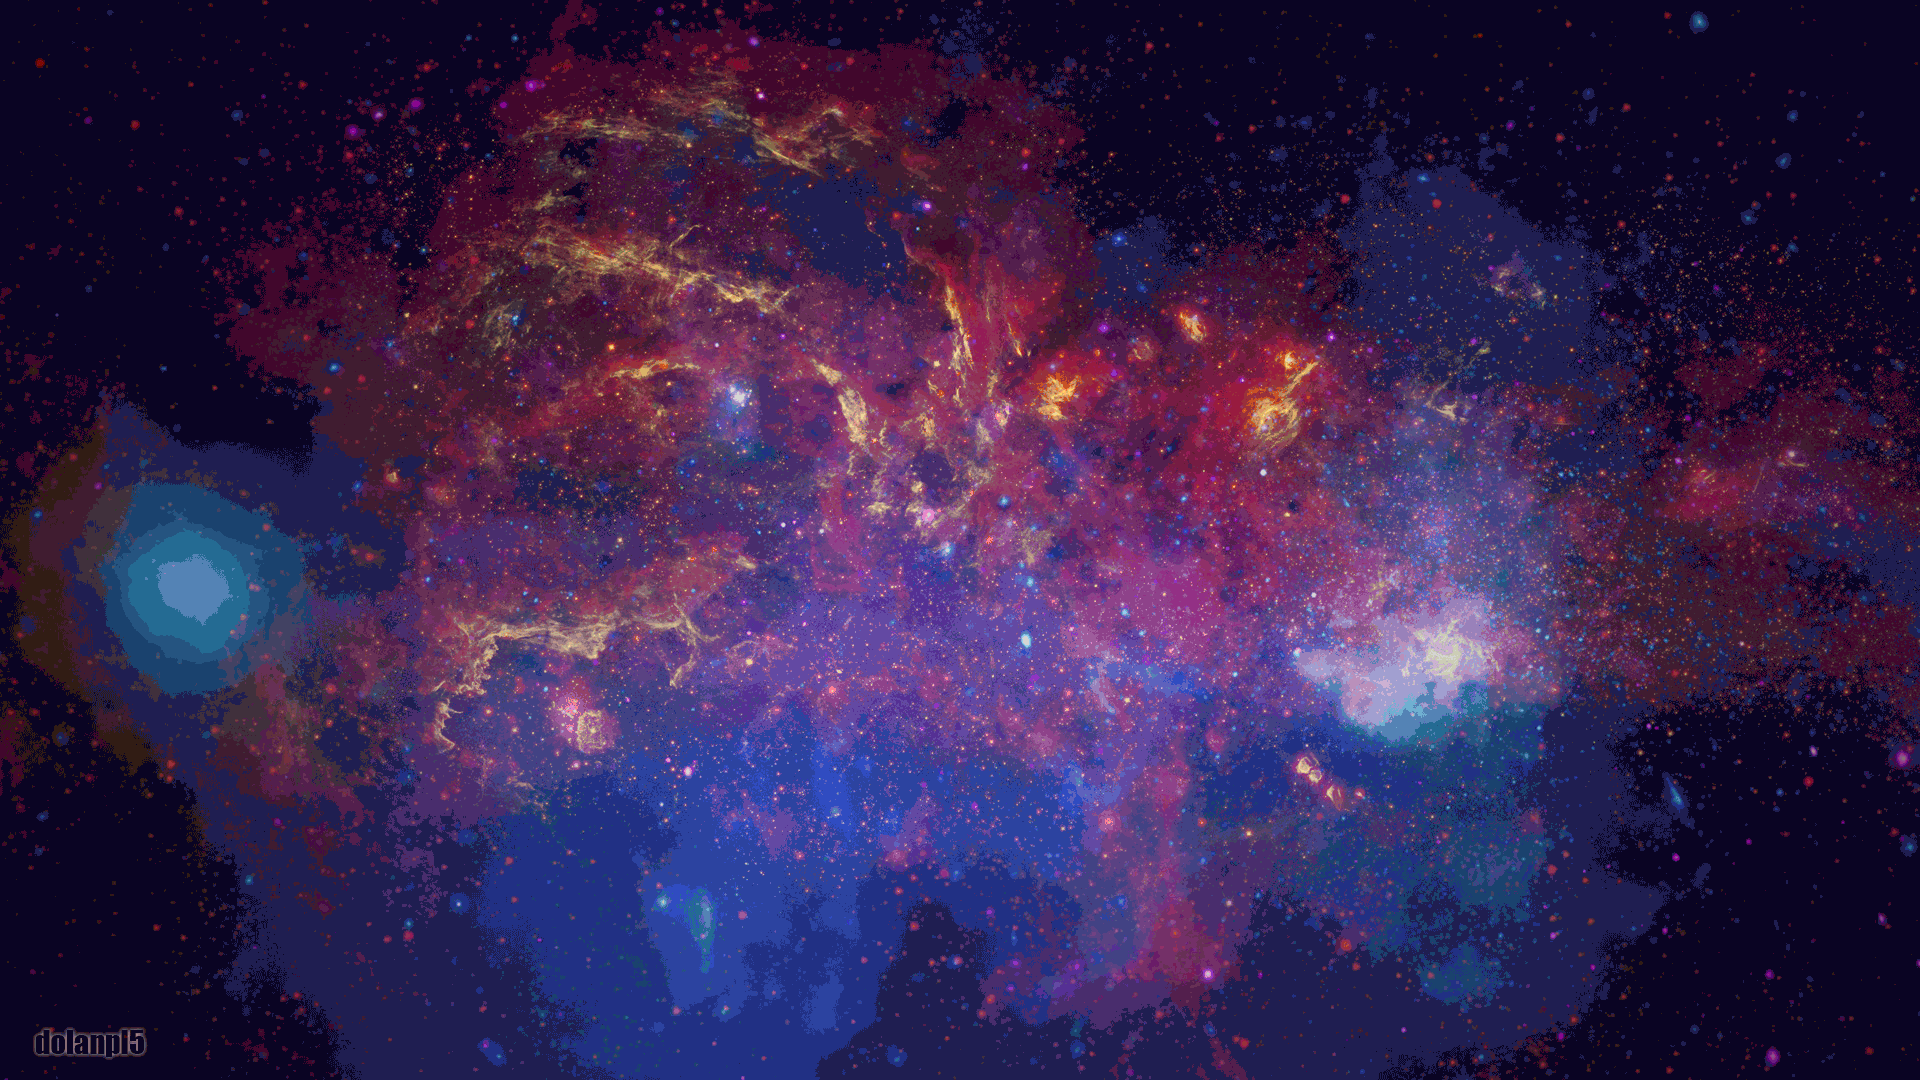 Space Wallpaper 4k Space Wallpaper 4k Via Giphy Galaxy | Images and